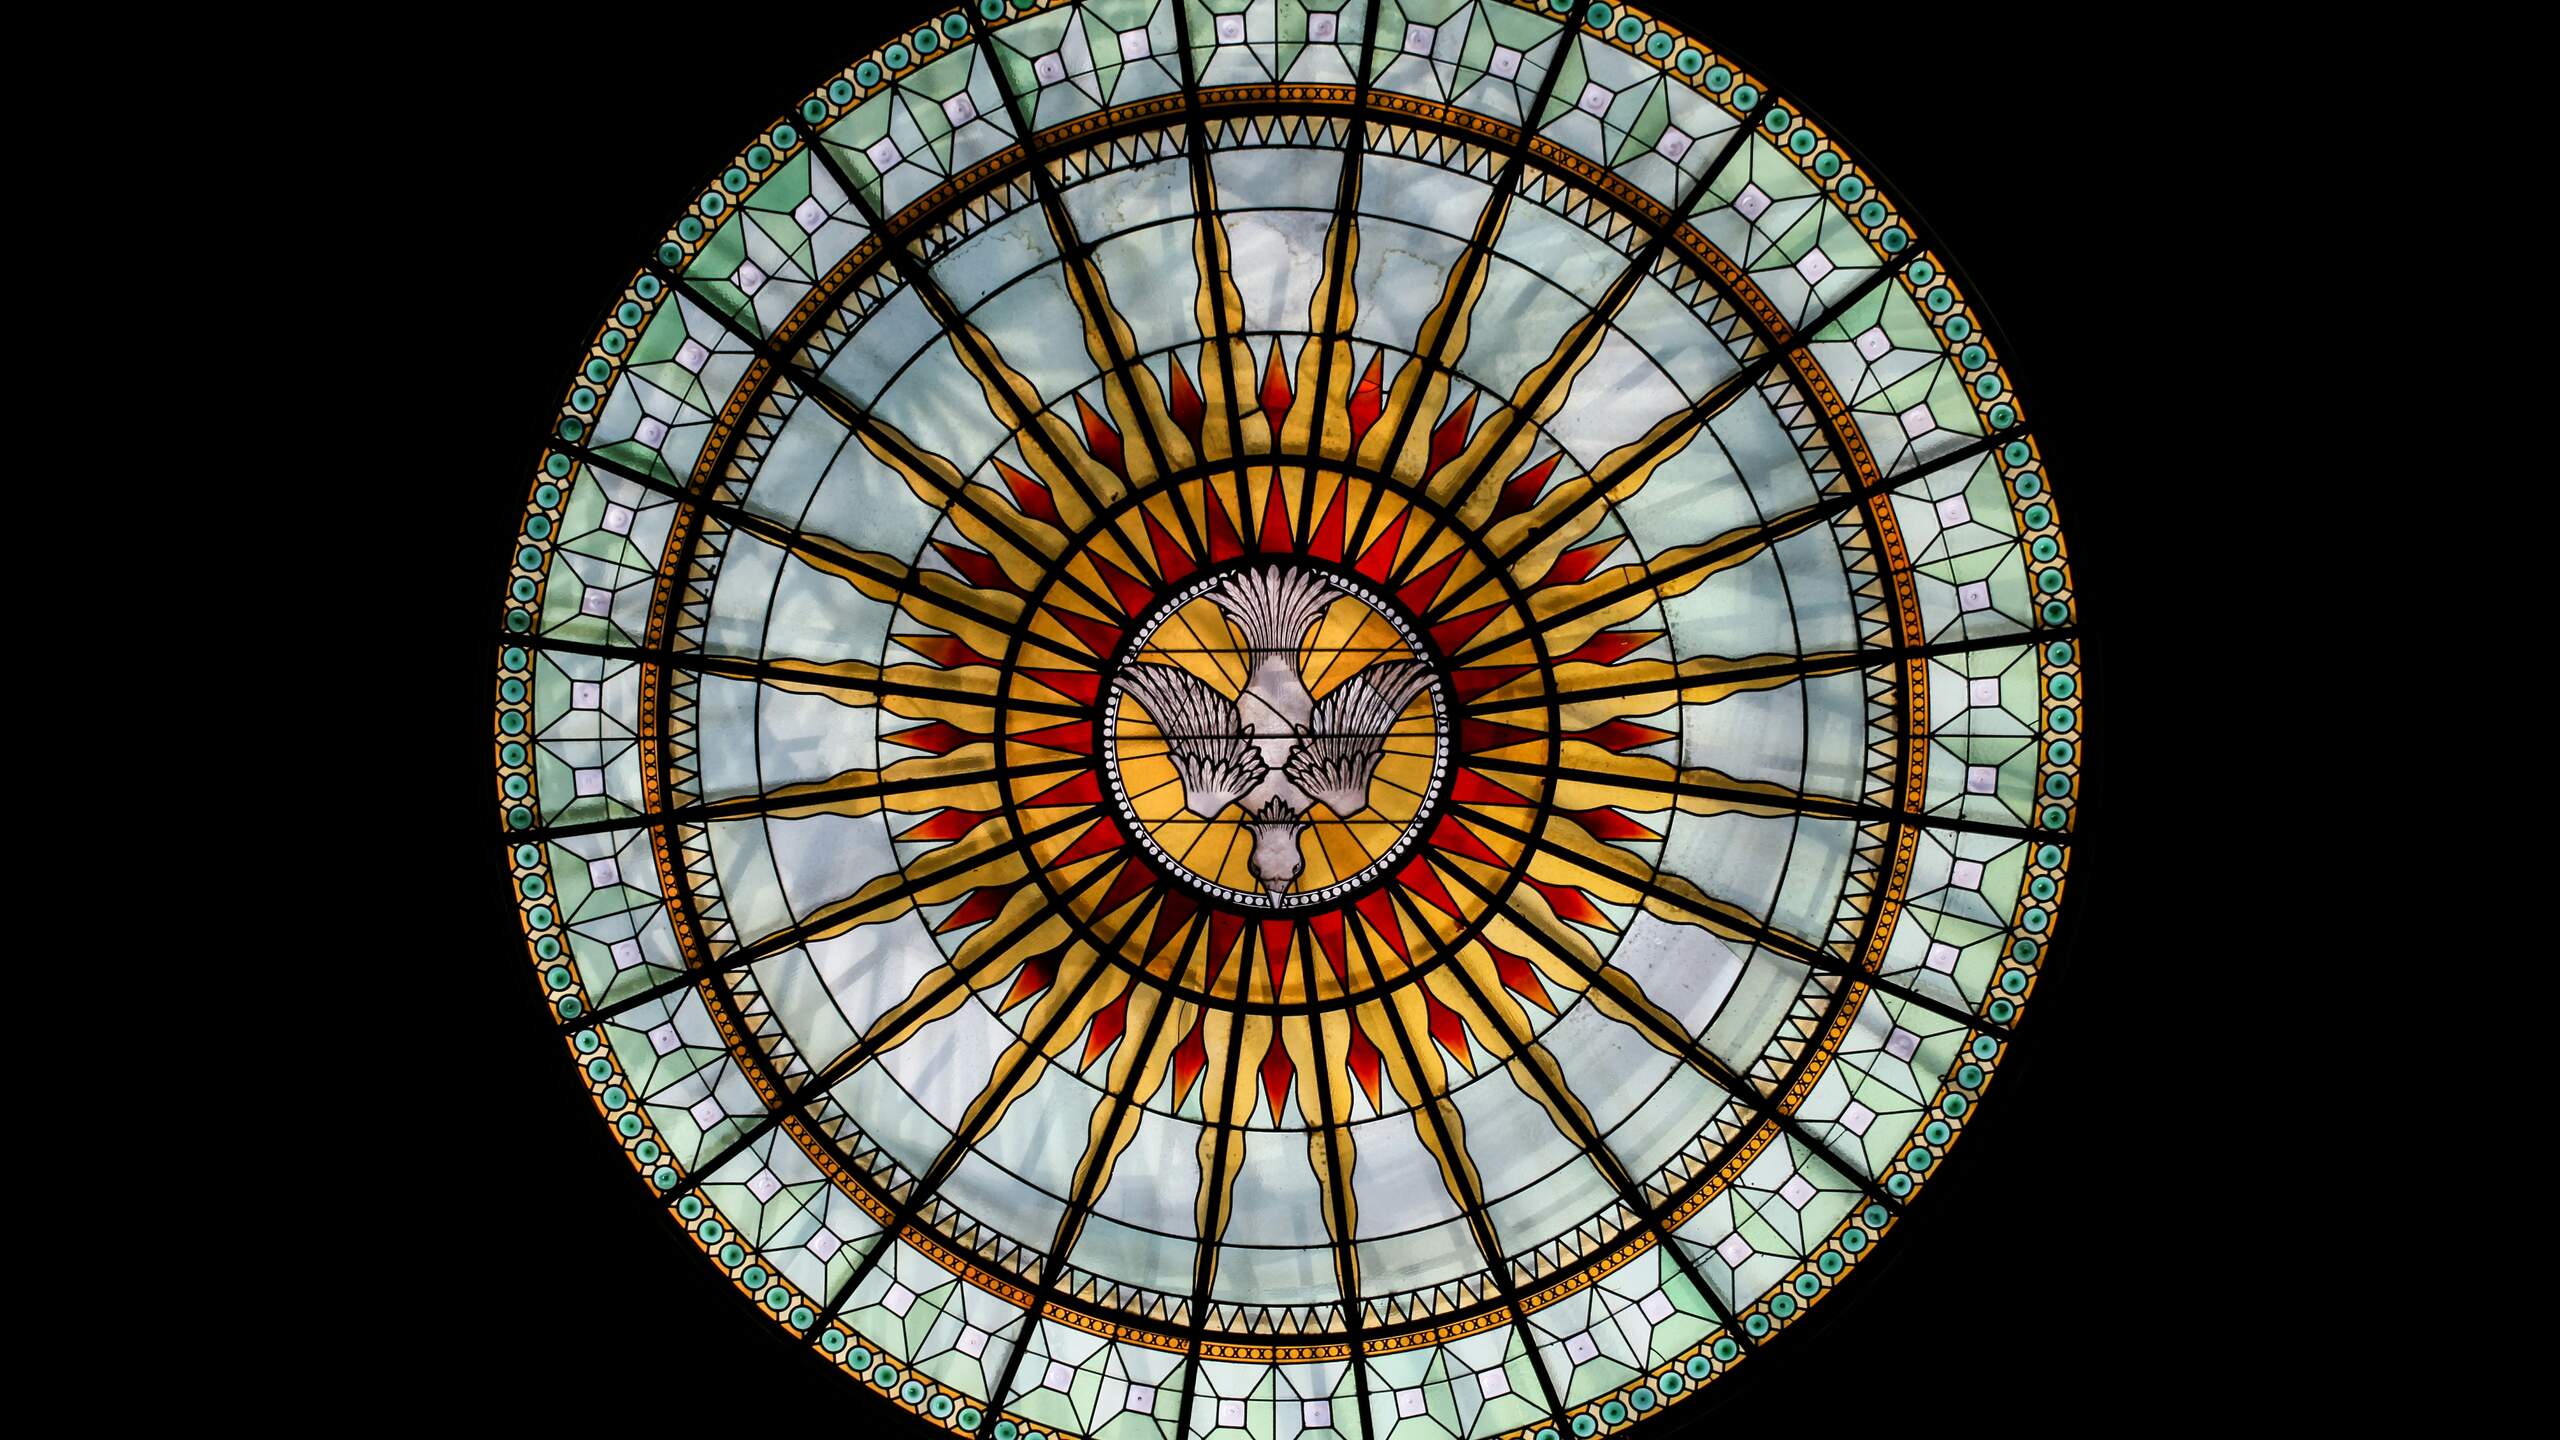 stained glass ceiling